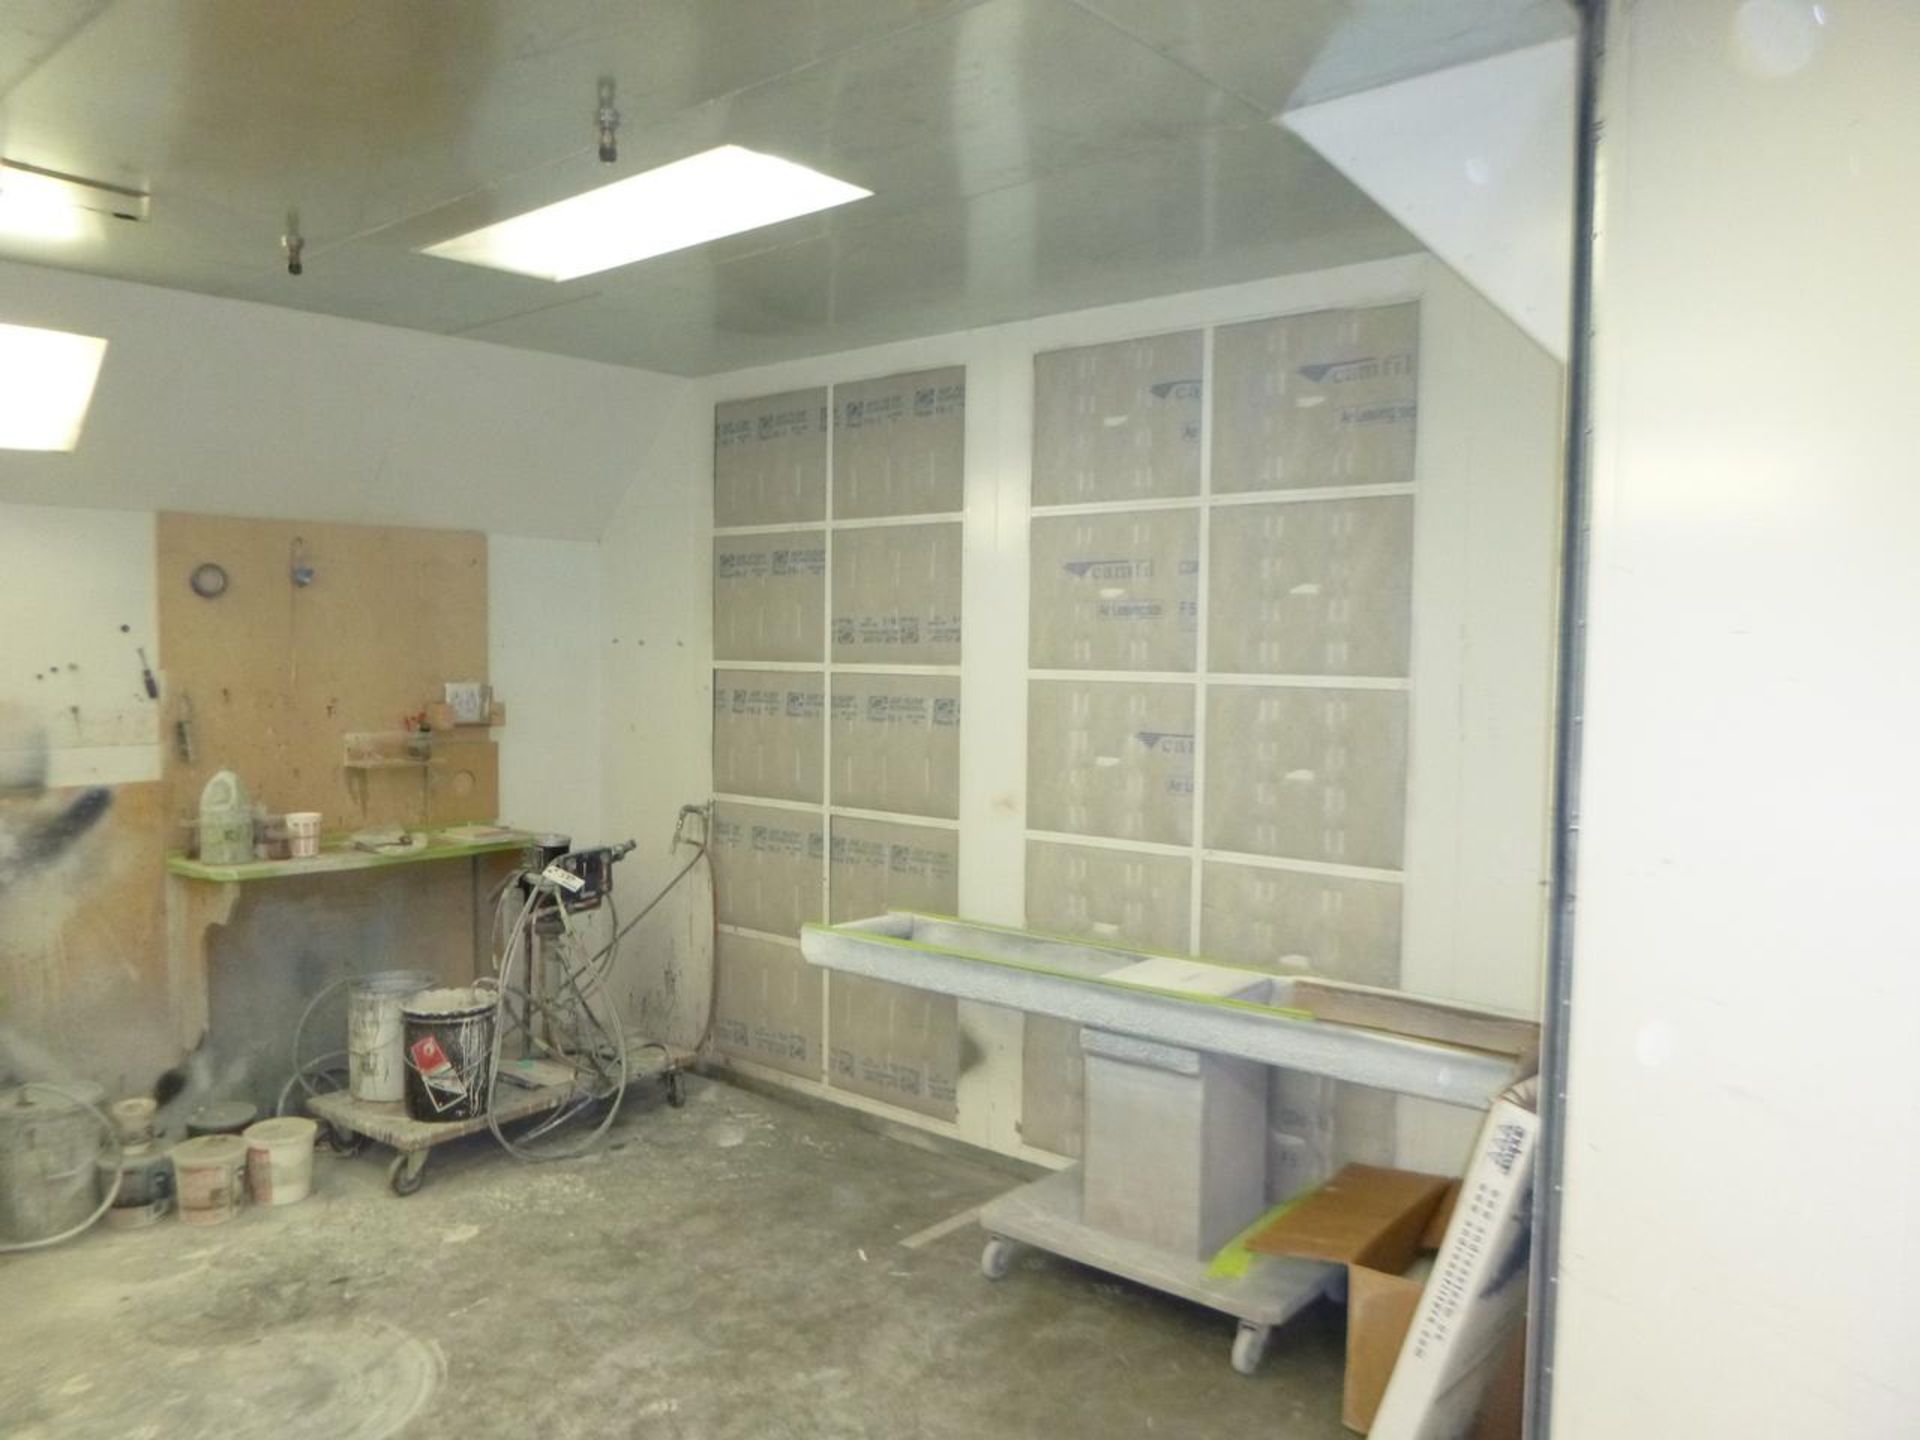 Spray Systems Inc Paint booth system - Image 3 of 7